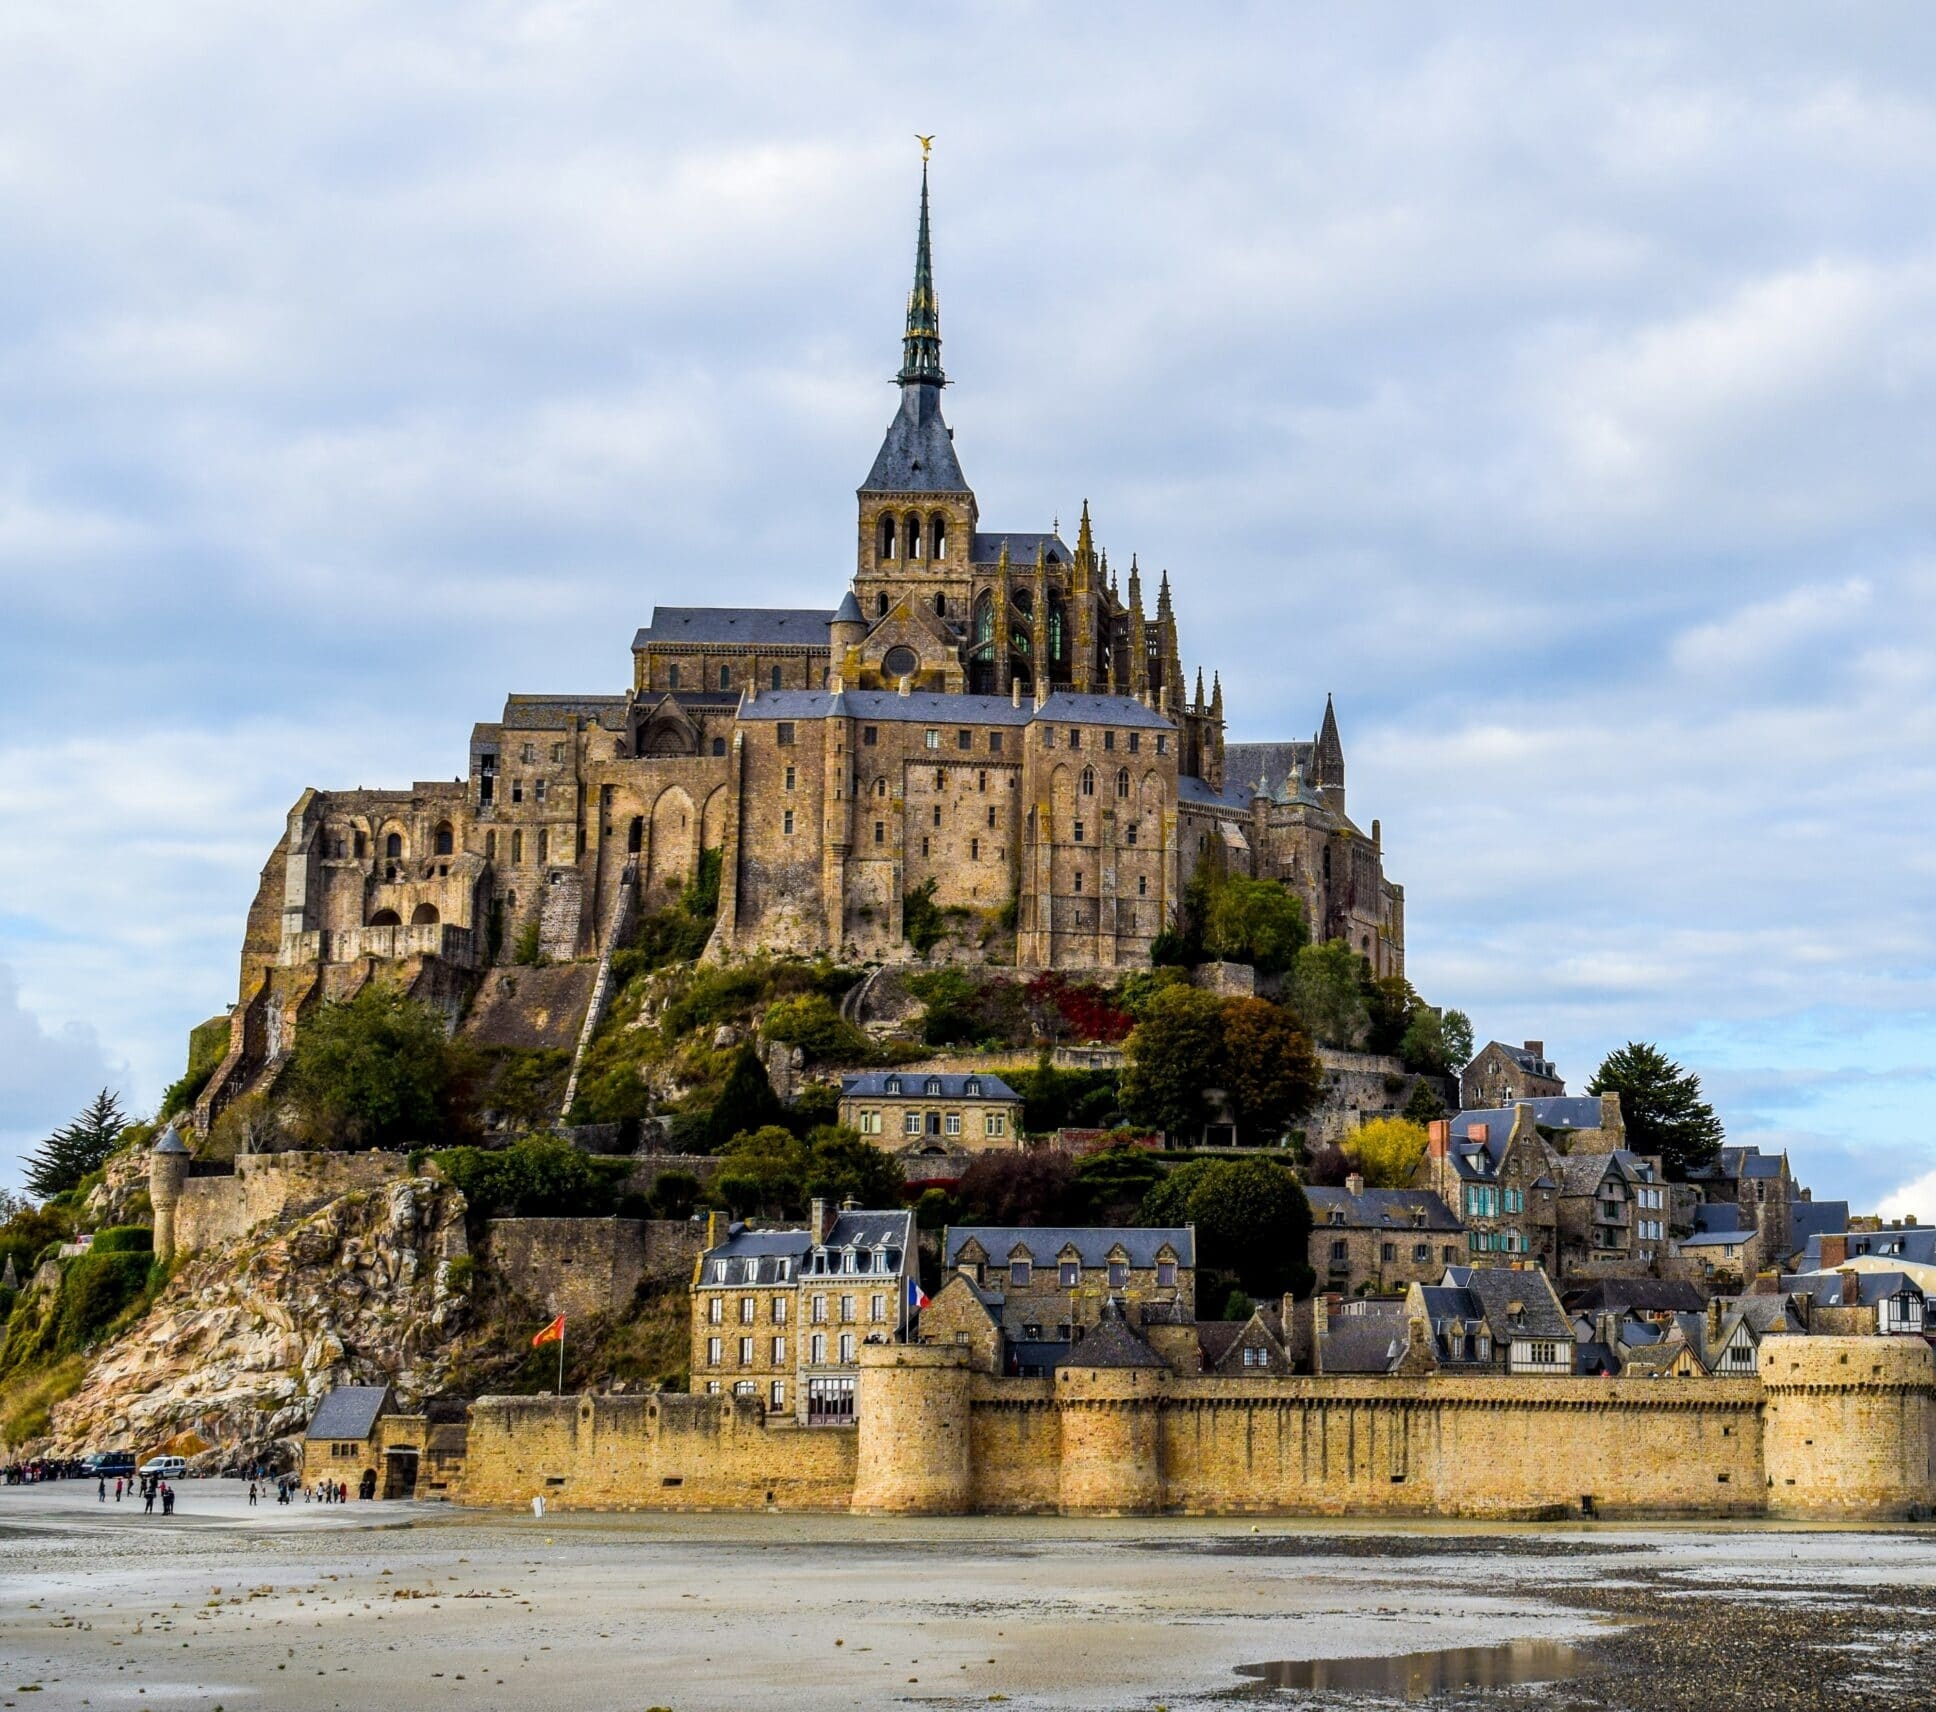 normandy discovery tours